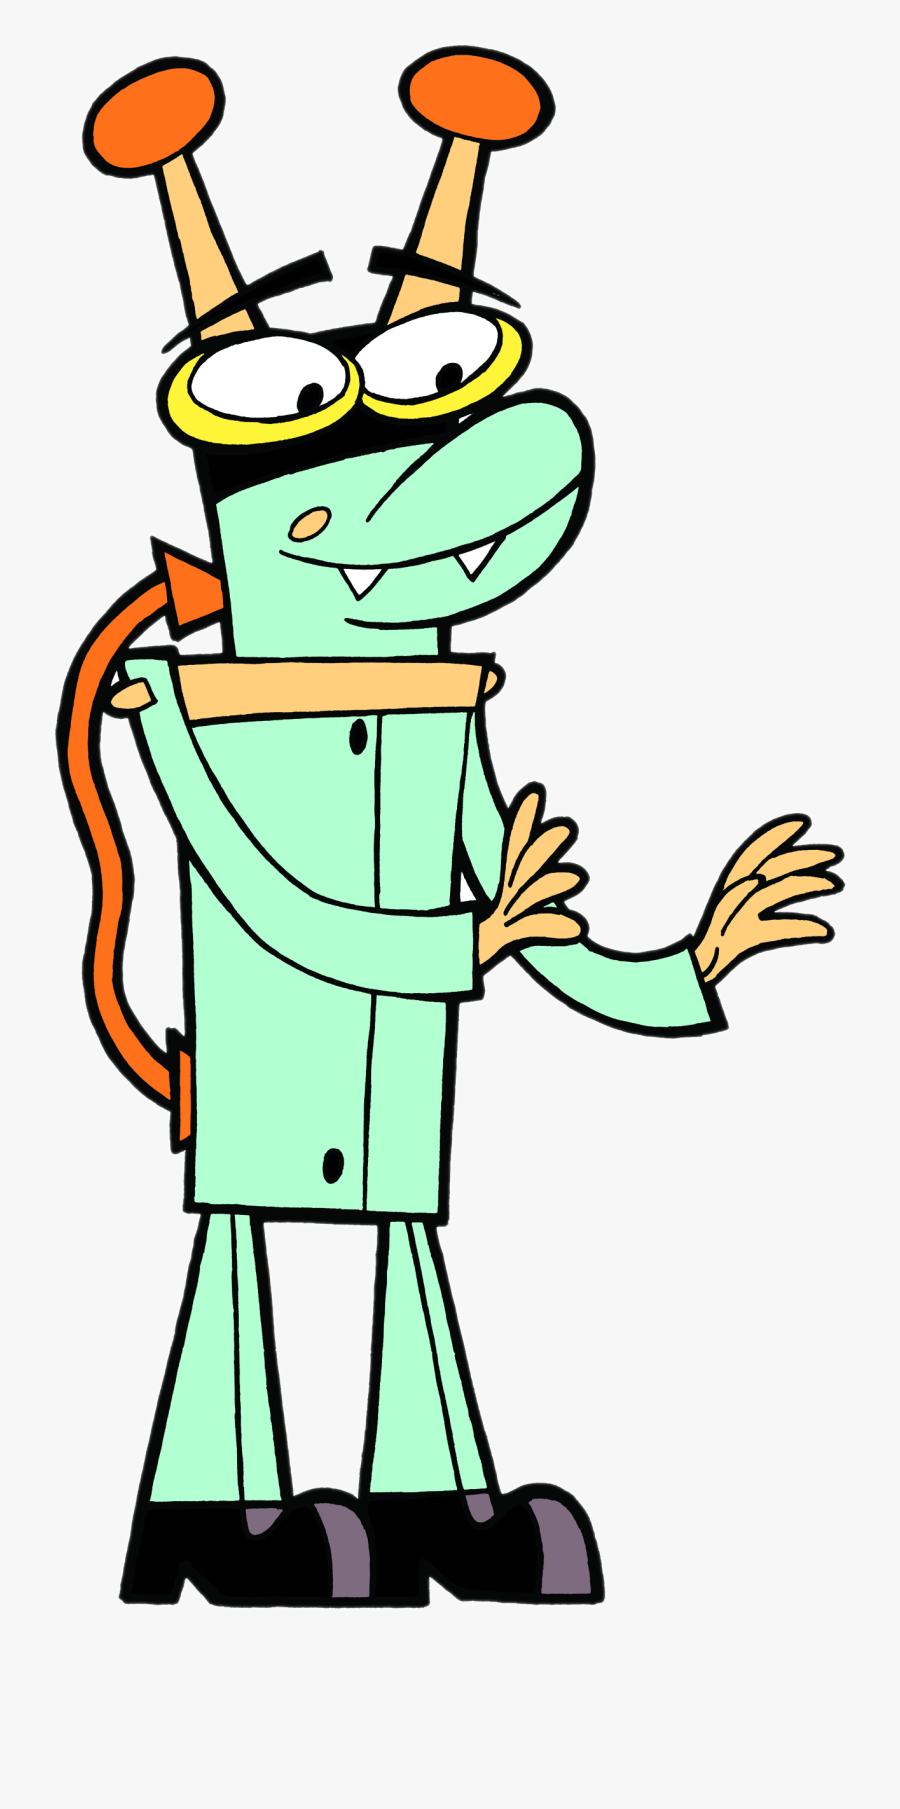 Delete Cyberchase Clipart , Png Download - Cyberchase Png, Transparent Clipart